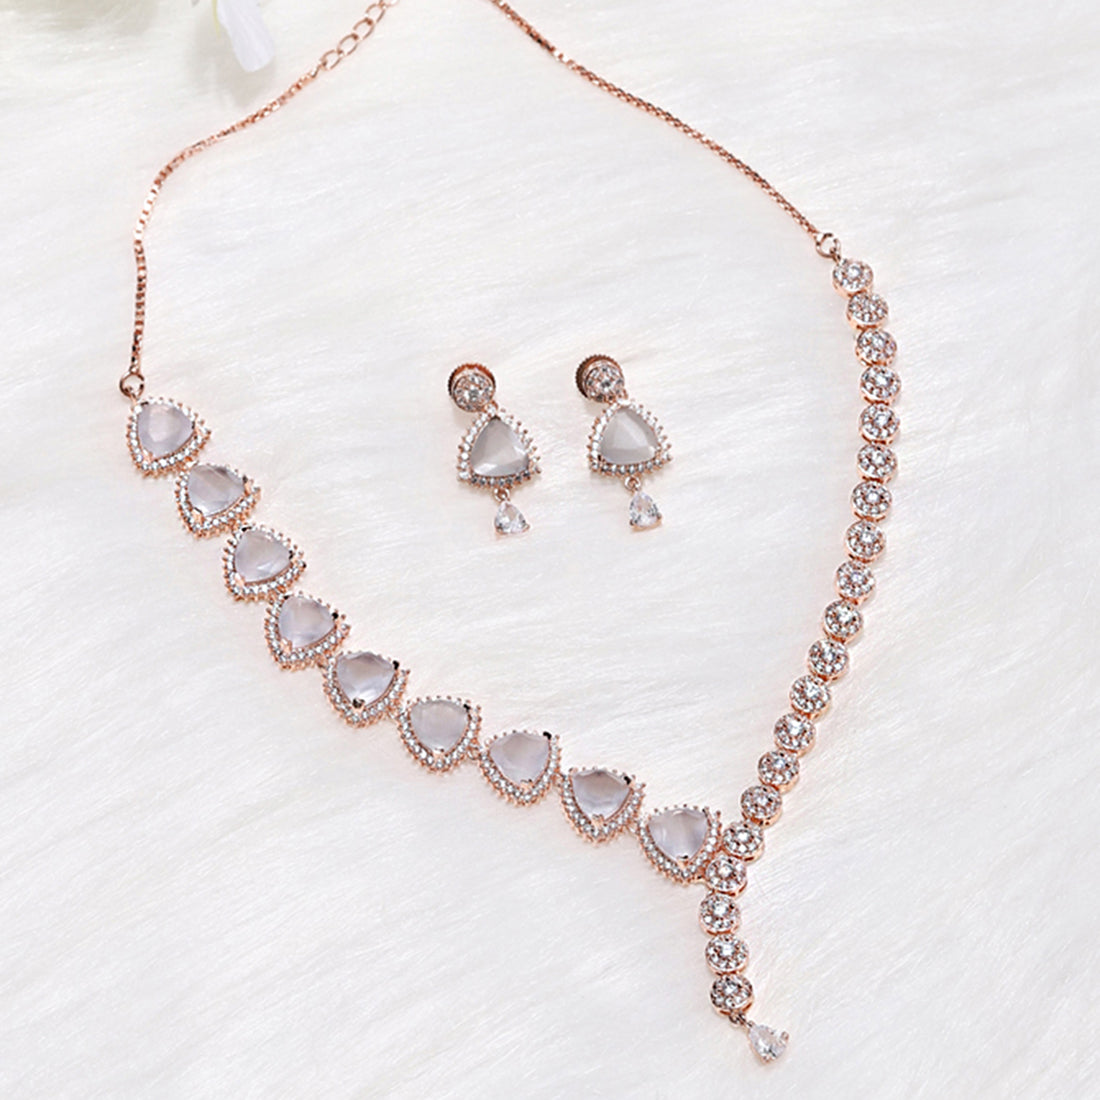 Amazon.com: Mariell Rose Gold Cubic Zirconia Prom Jewelry Set, Necklace & Earrings  Set for Wedding, Bride, Bridesmaid: Clothing, Shoes & Jewelry